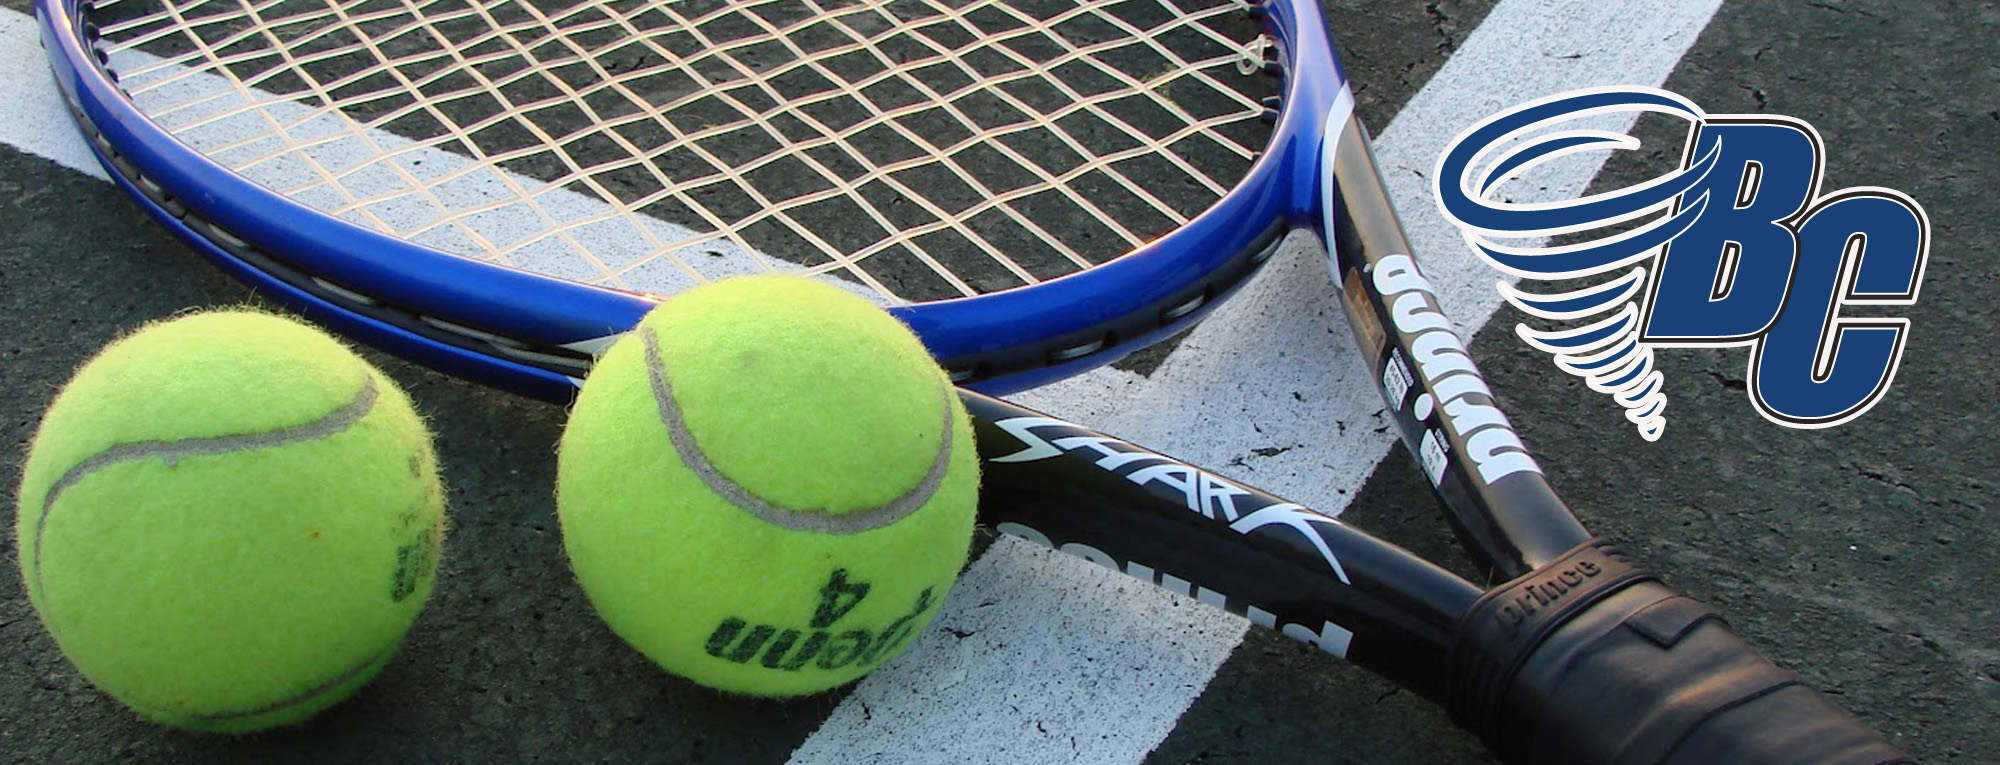 Tornados Return to Courts, Face Montreat Saturday